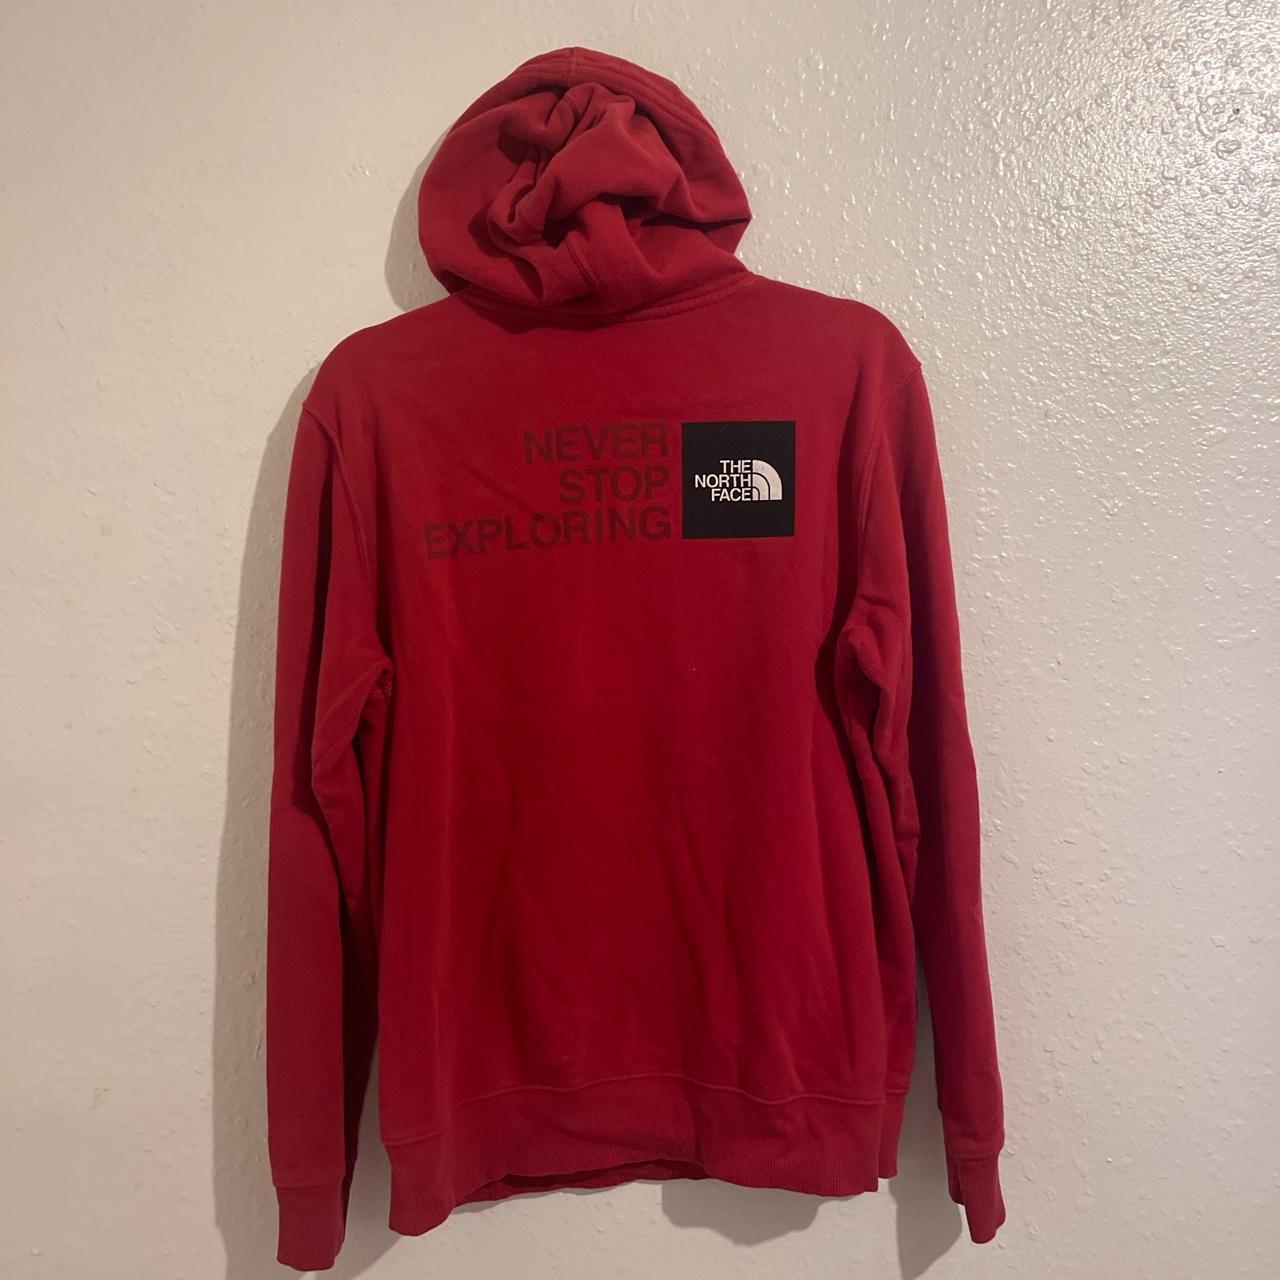 The North Face Men's Red and Black Hoodie (4)